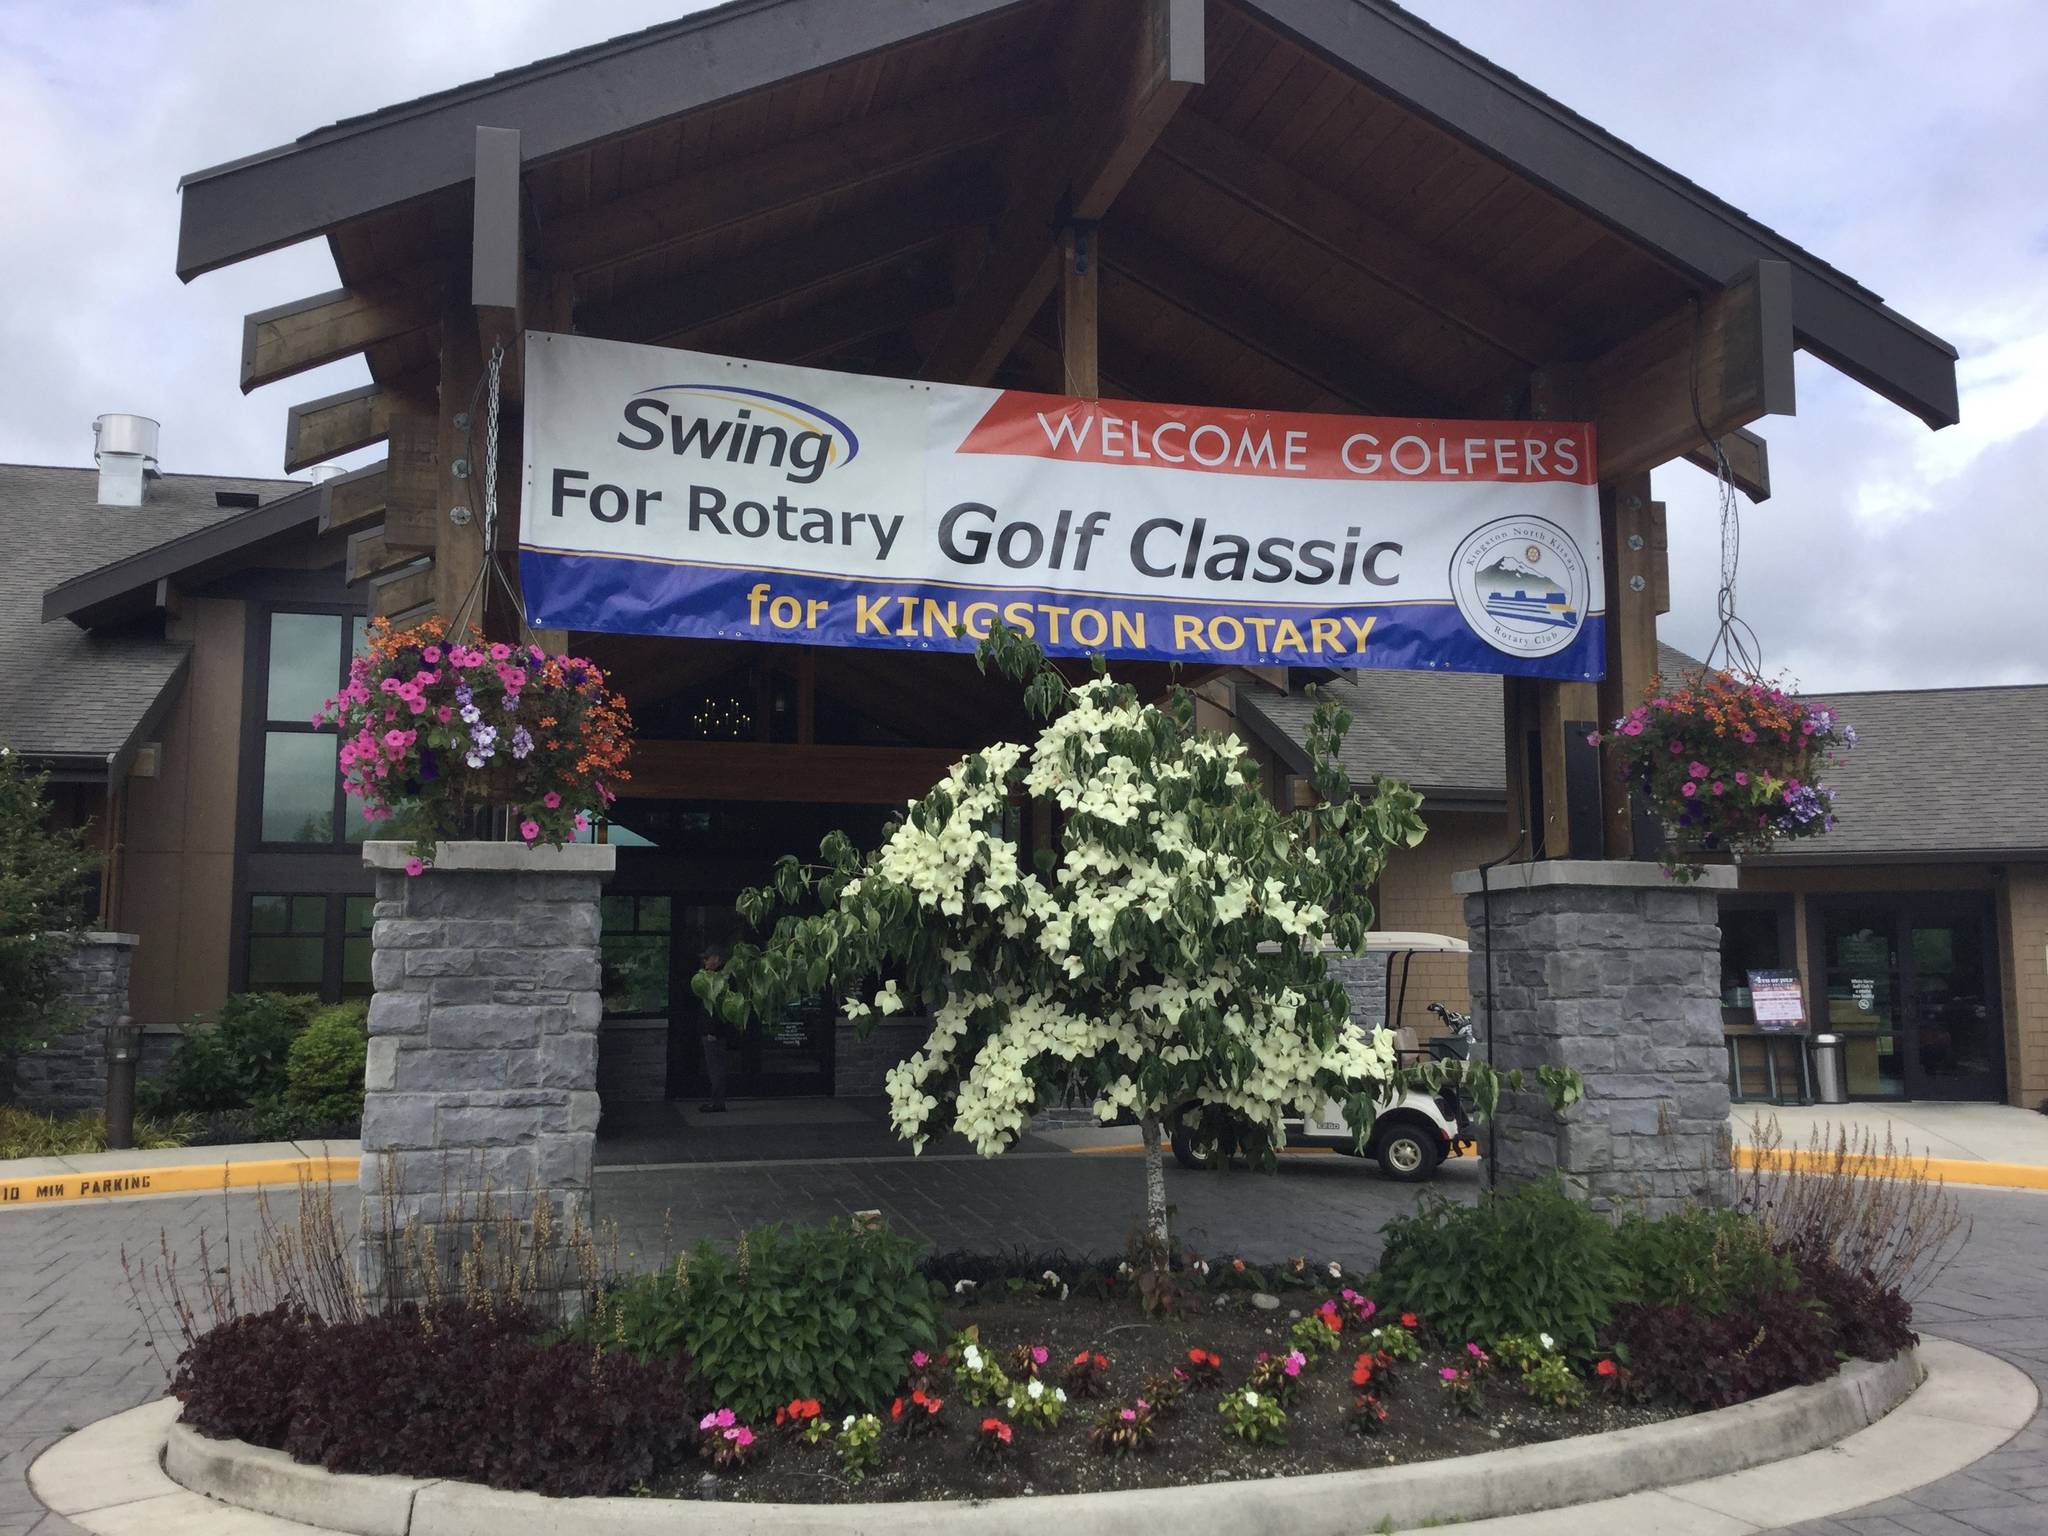 The Swing for Rotary Golf Classic will return to White Horse Golf Club on June 21. Photo courtesy Kingston North Kitsap Rotary Club